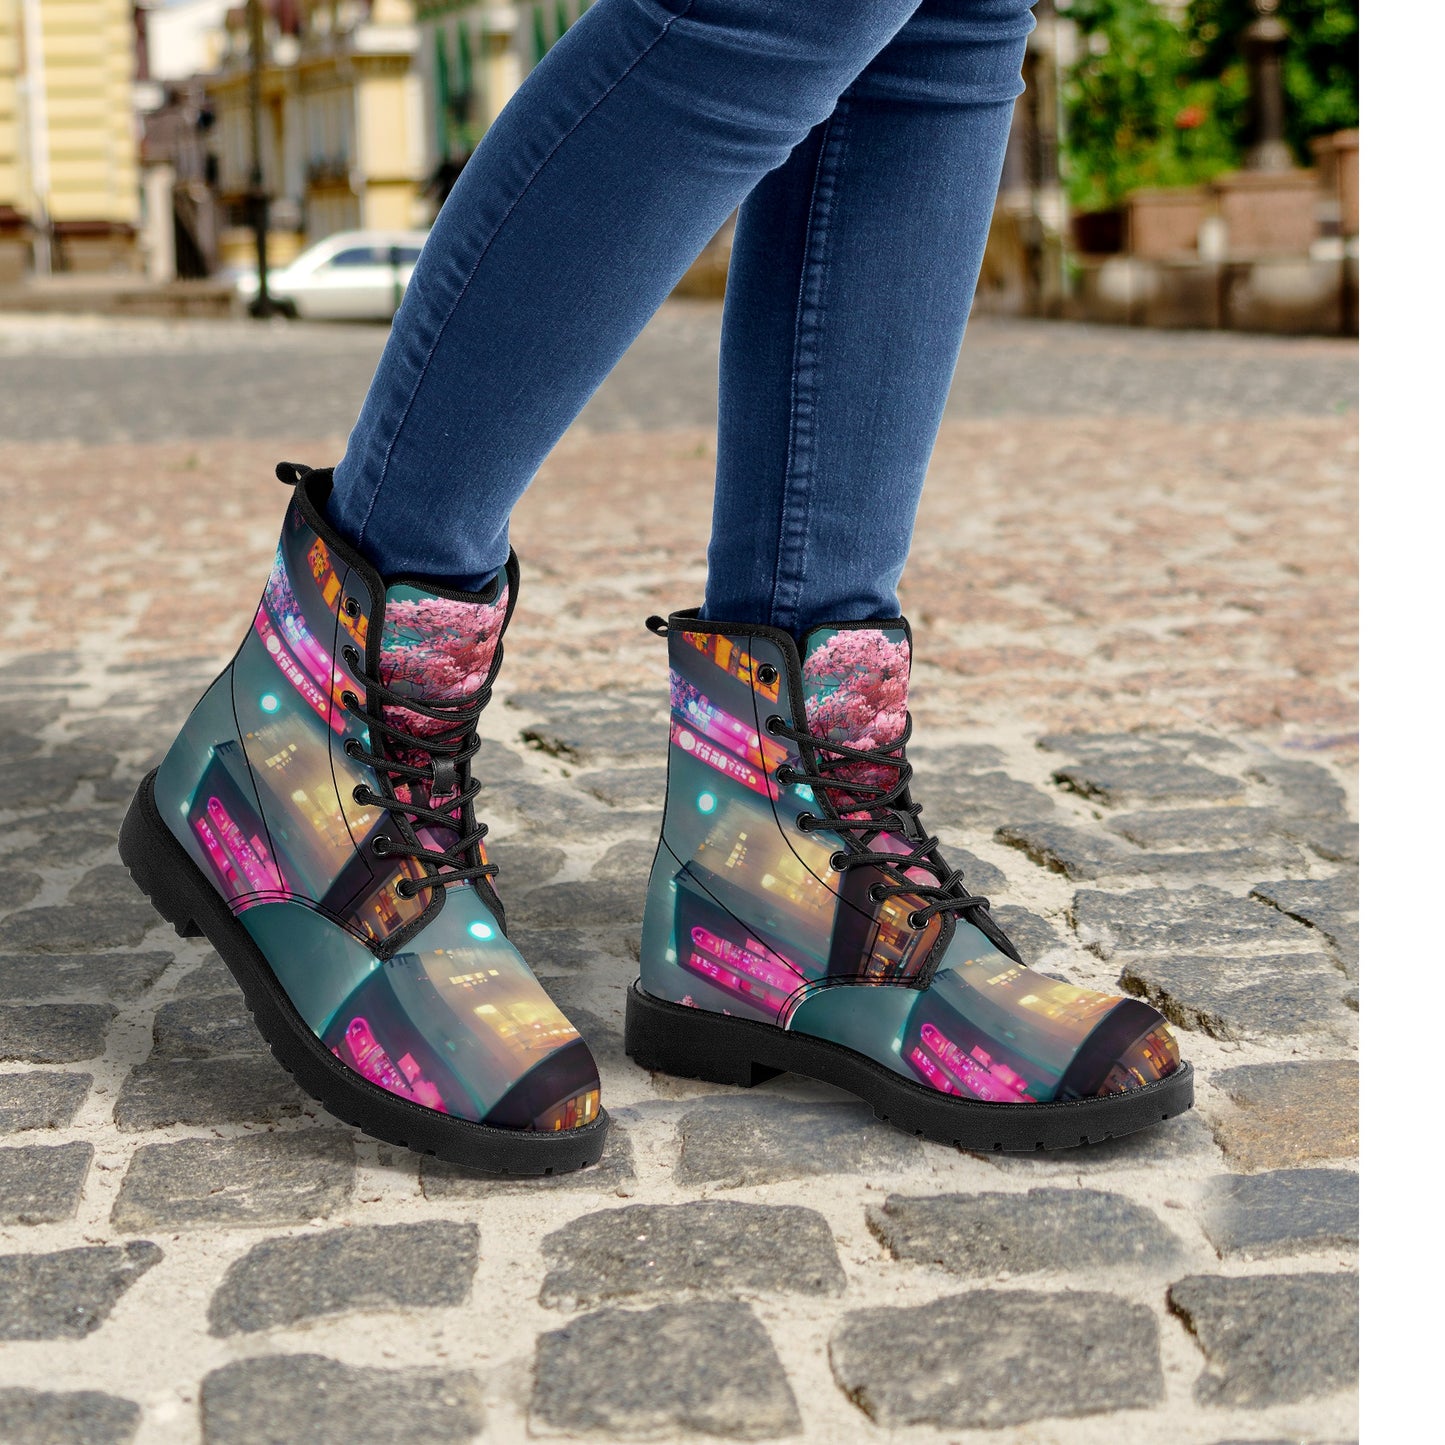 Women's Japan Boots, Japanese Street Style Boots